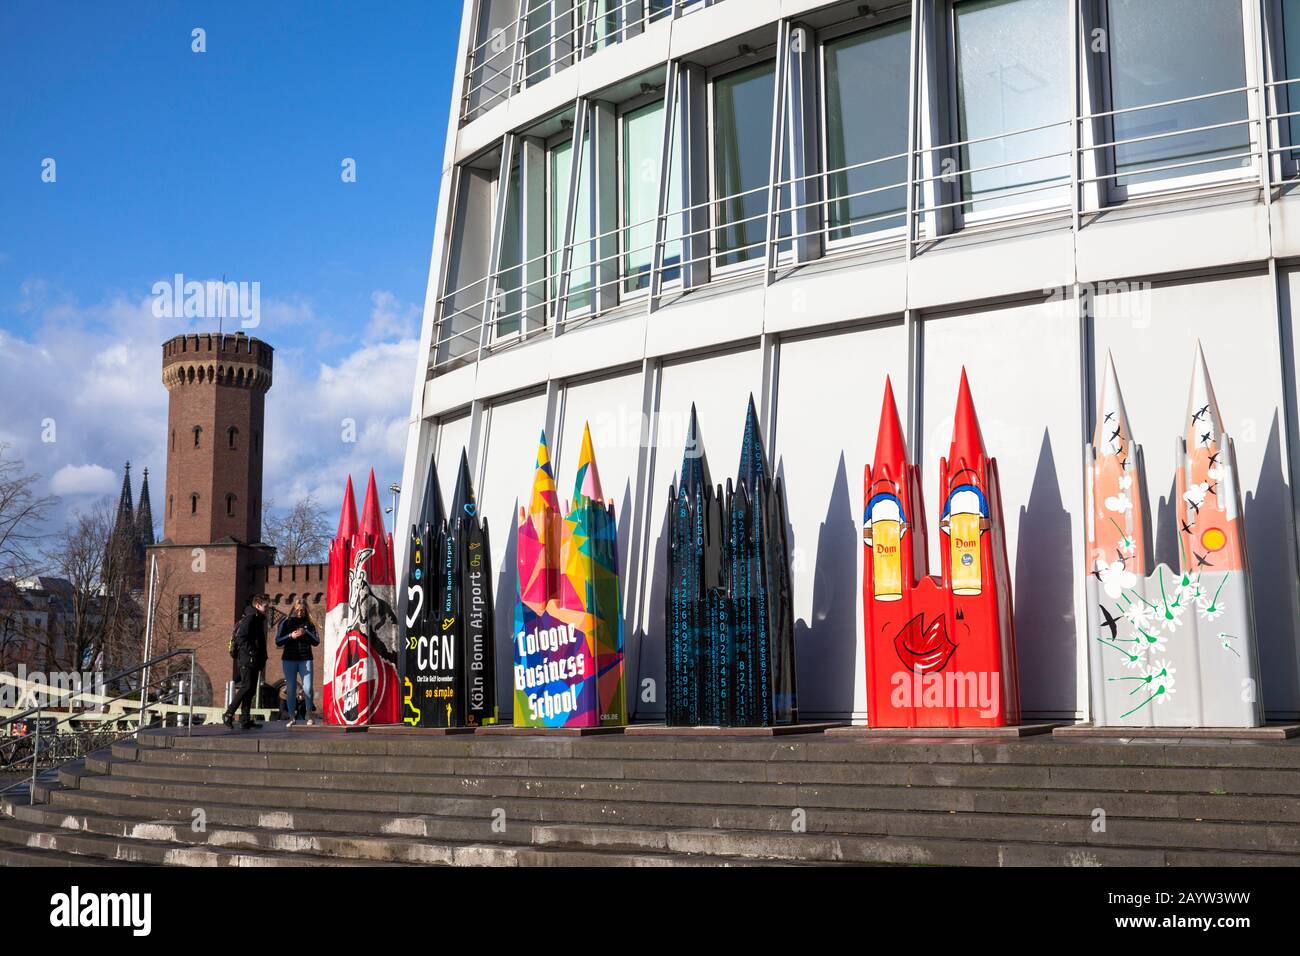 sculpture project 'Dome-Cologne', colorful sculptures of the cathedral  in front of the Chocolate Museum in the Rheinau harbor, Malakoff tower, Cologn Stock Photo